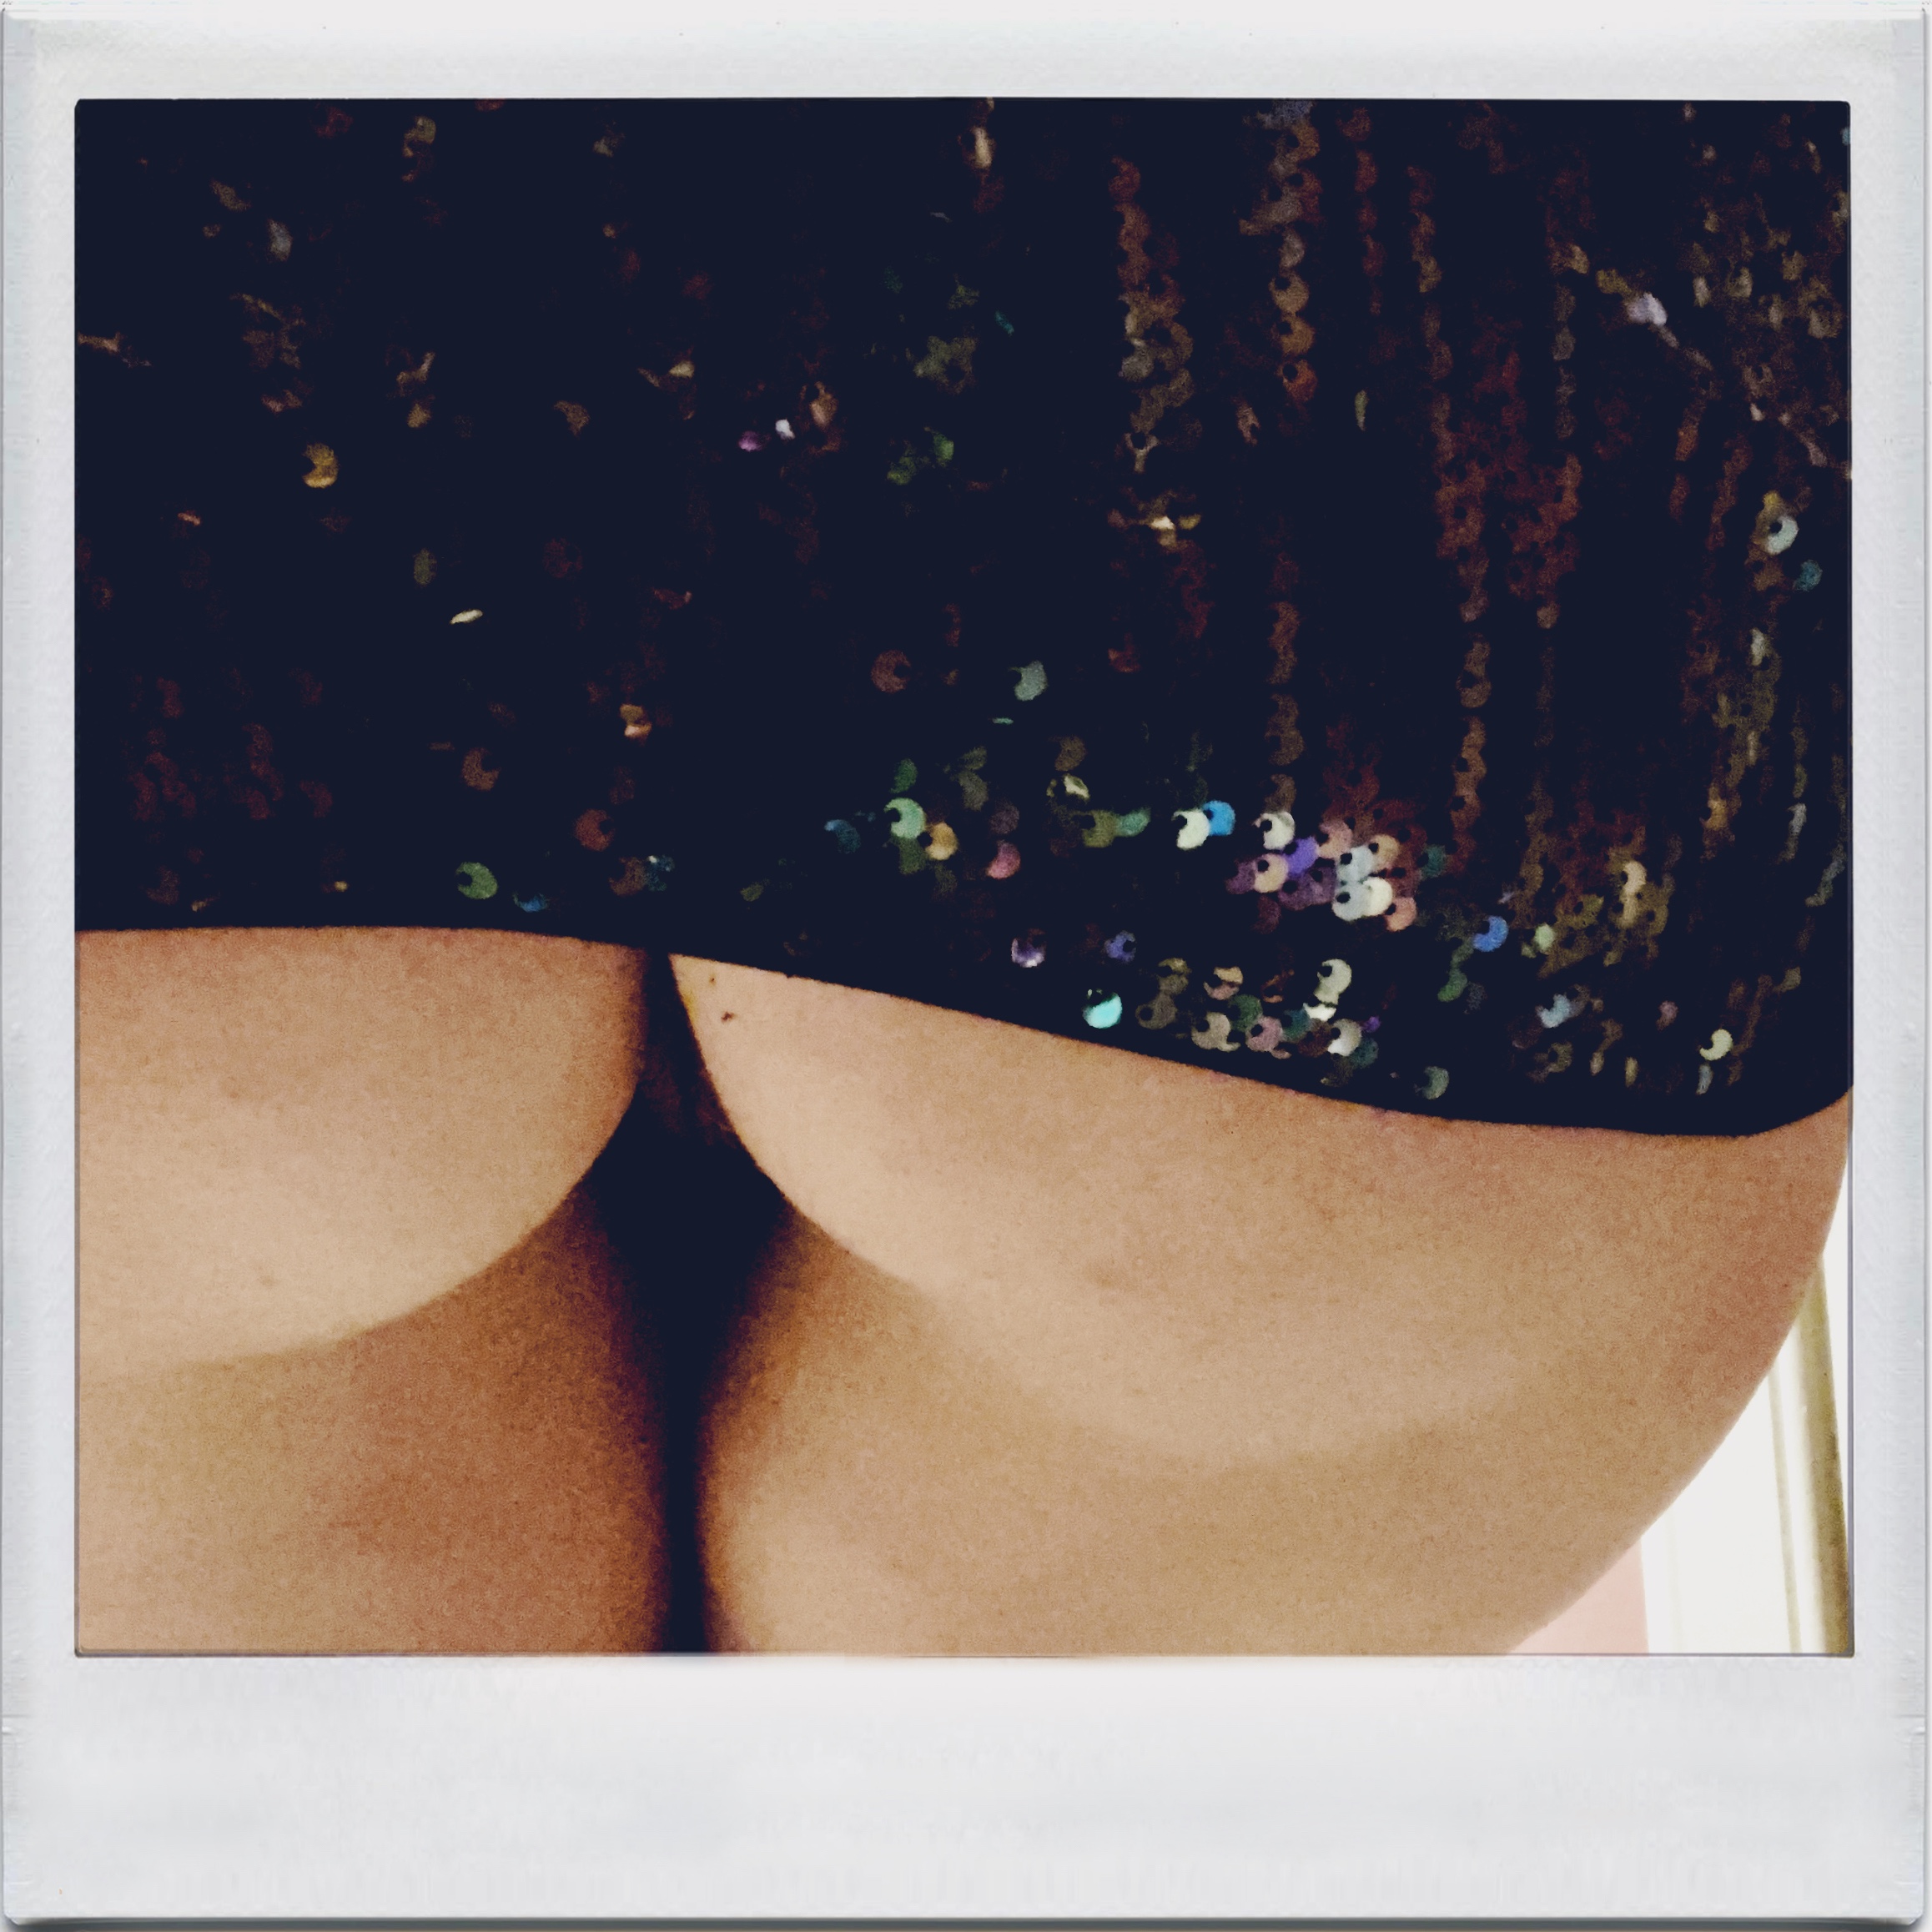 An image of my arse, revealed as I have pulled up my dress covered in sequins